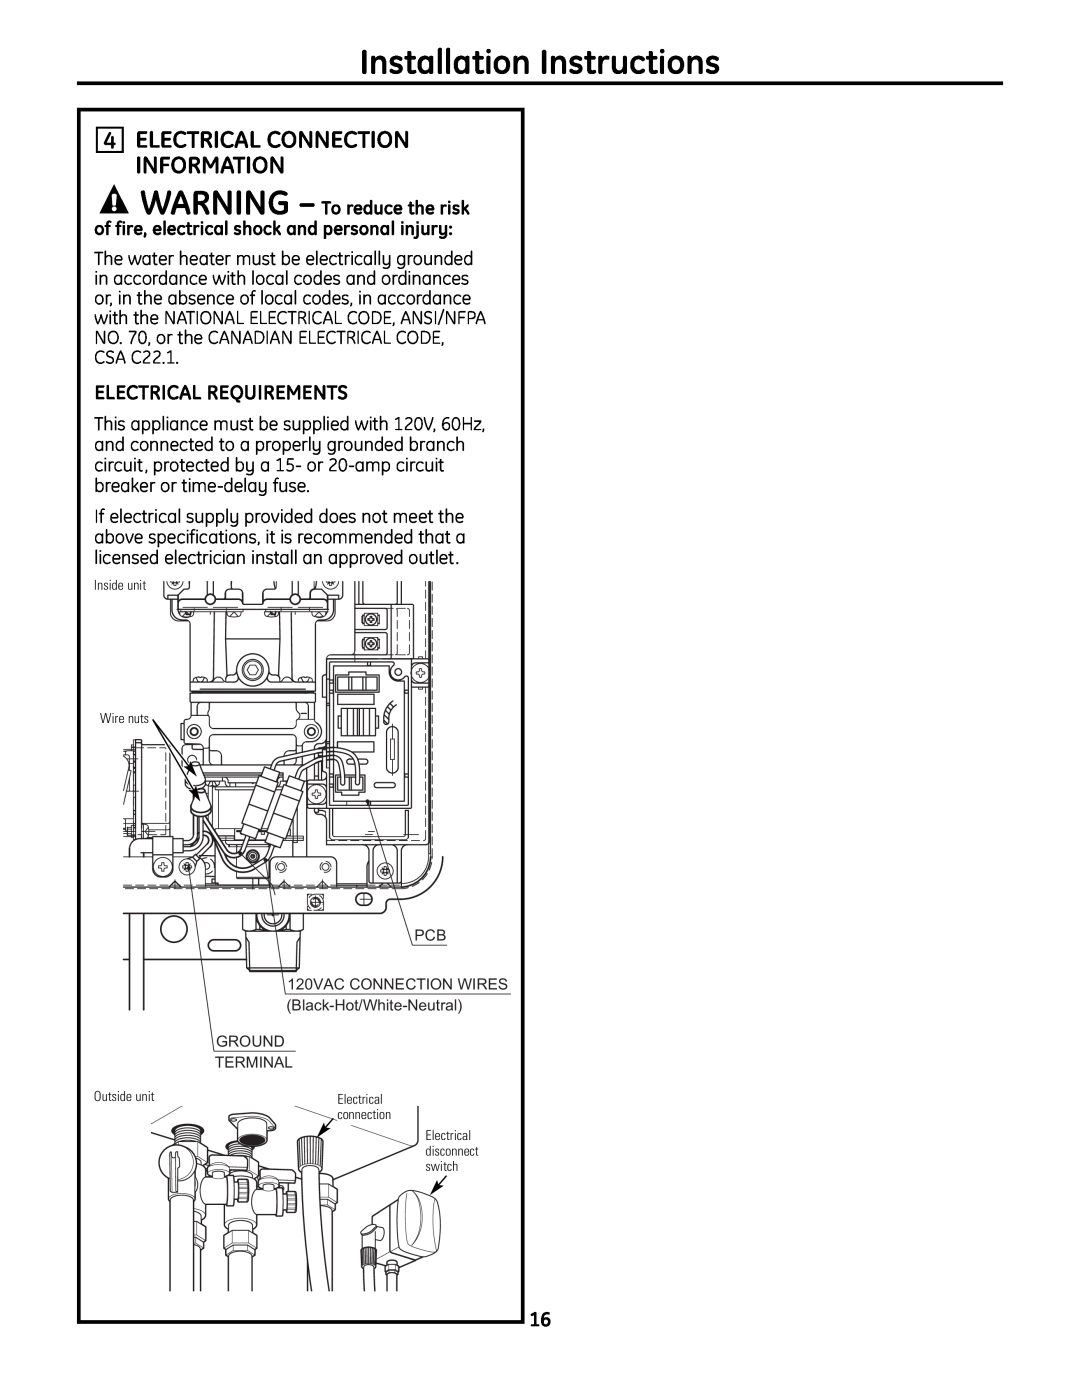 GE GN94ENSRSA, GP94ENSRSA, GN75ENSRSA Electrical Connection Information, Electrical Requirements, Installation Instructions 